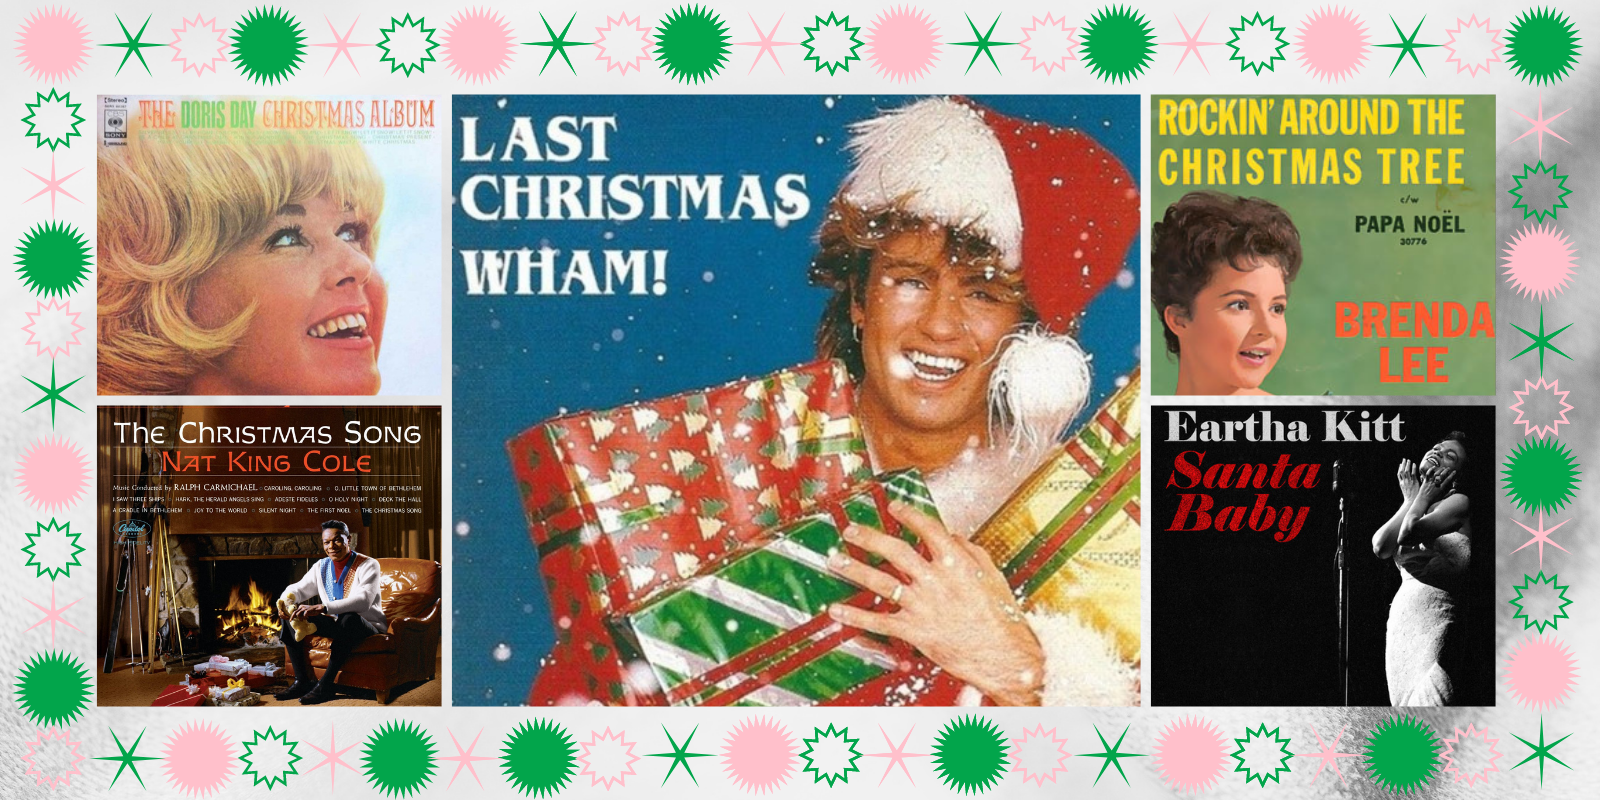 Most Lesbian Christmas Songs: A collage of five Christmas albums by Doris Day, Nat King Cole, Wham!, Brenda Lee, and Eartha Kitt